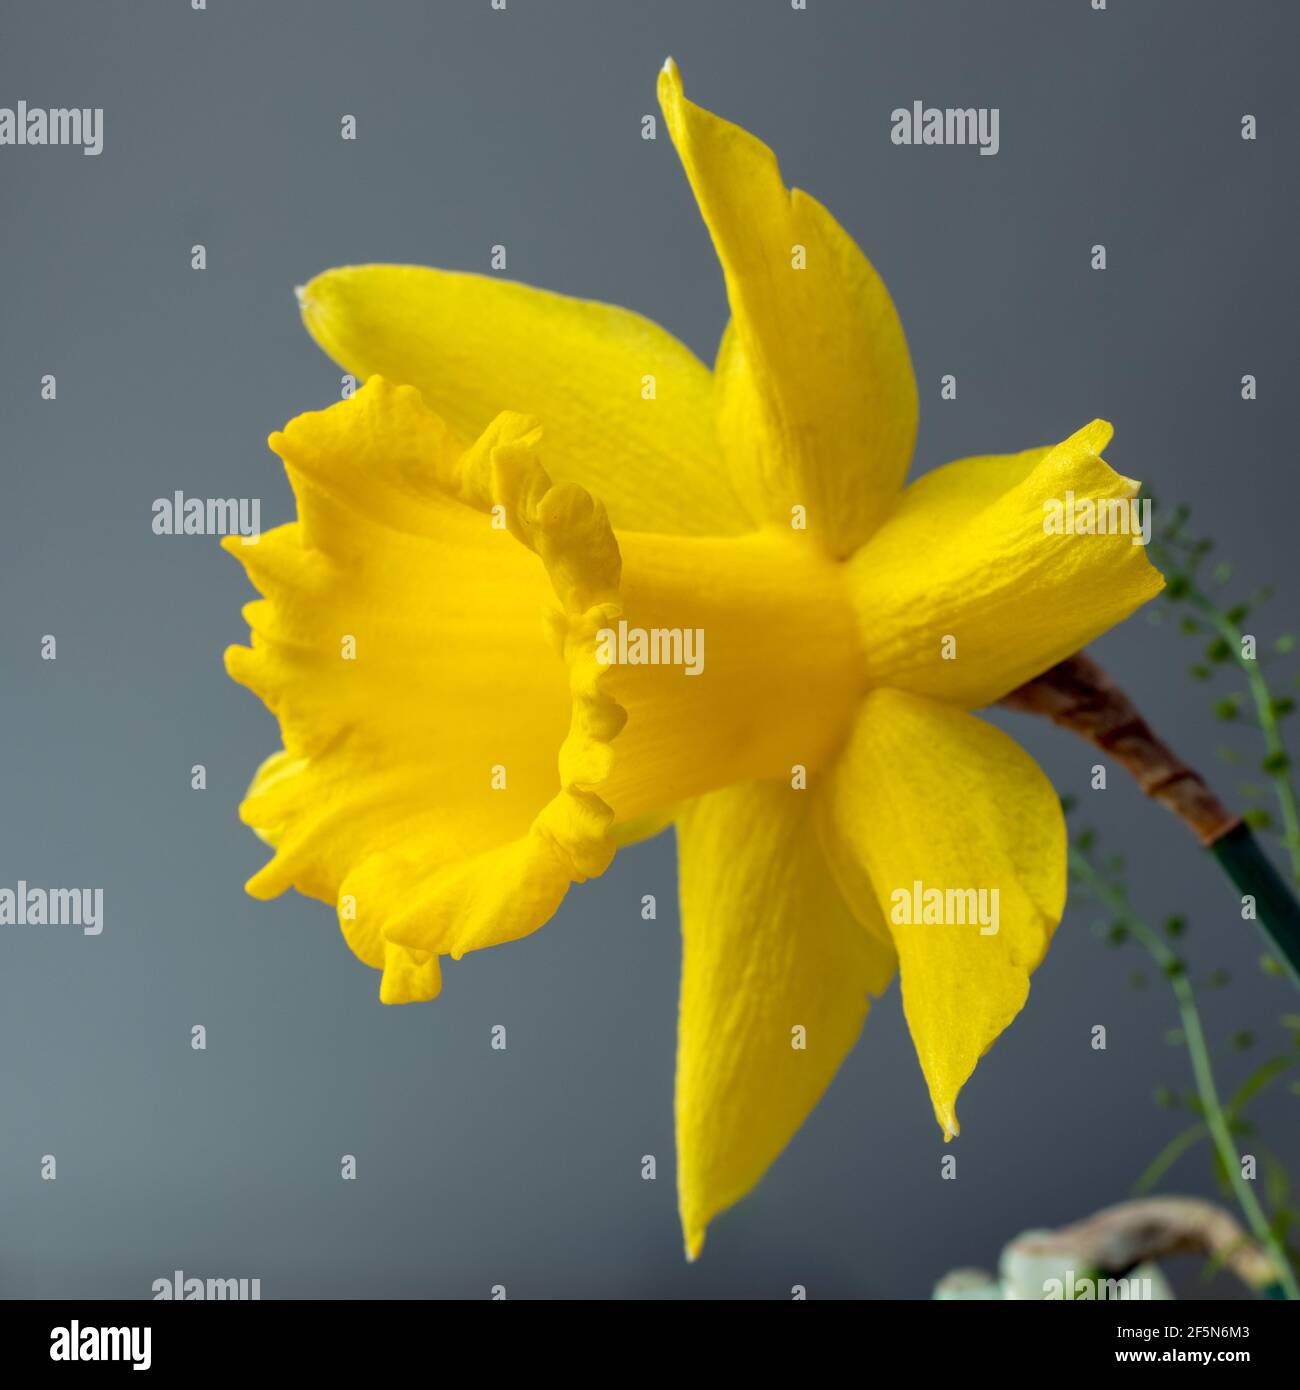 Vibrant yellow Daffodil in a vase Stock Photo